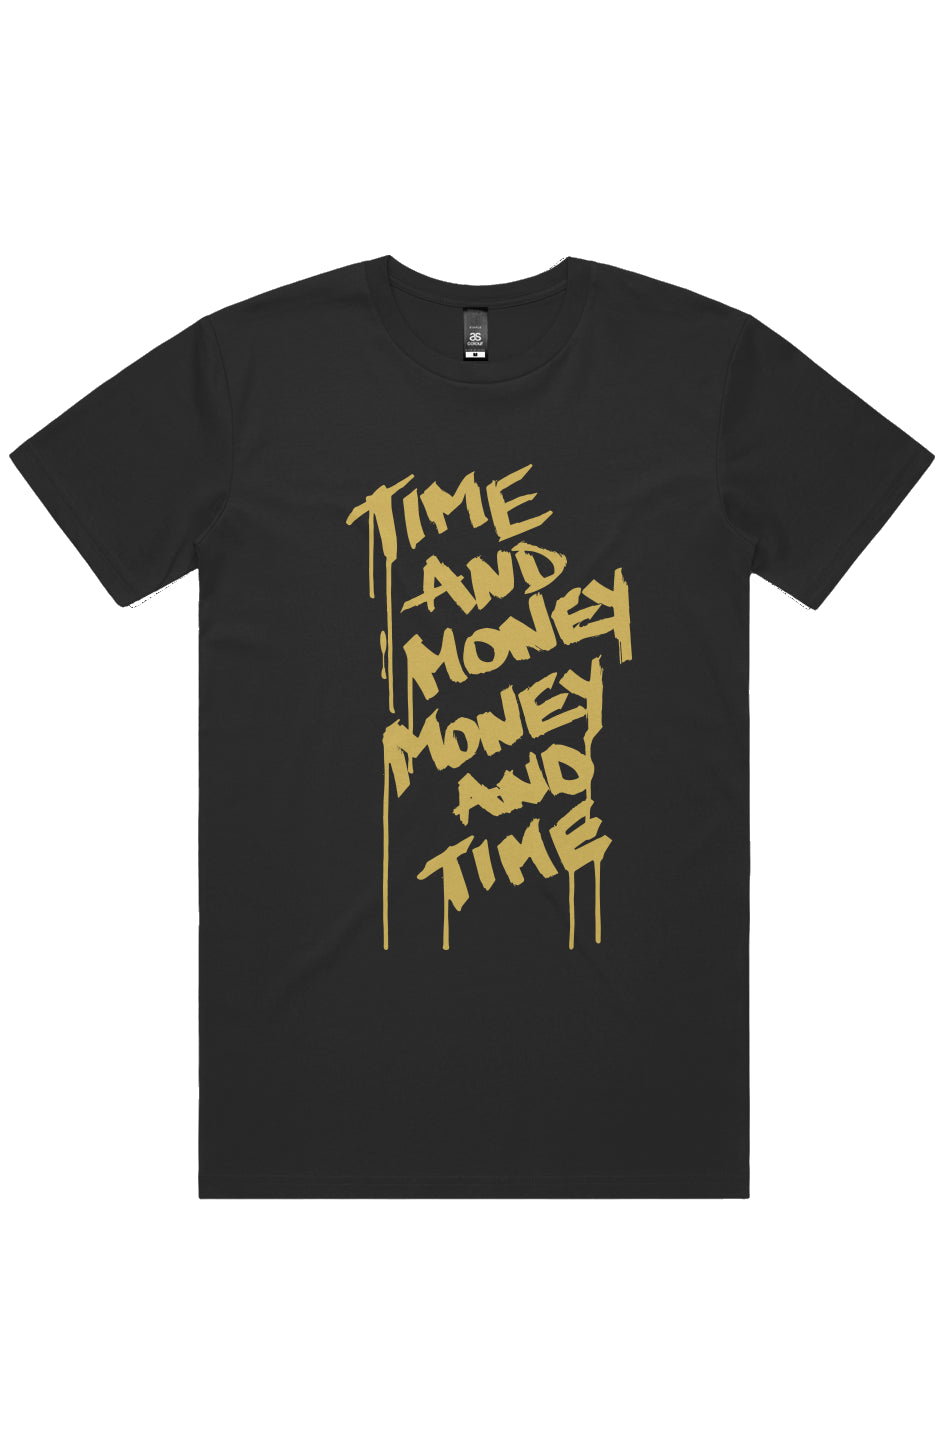 Time and money money and time